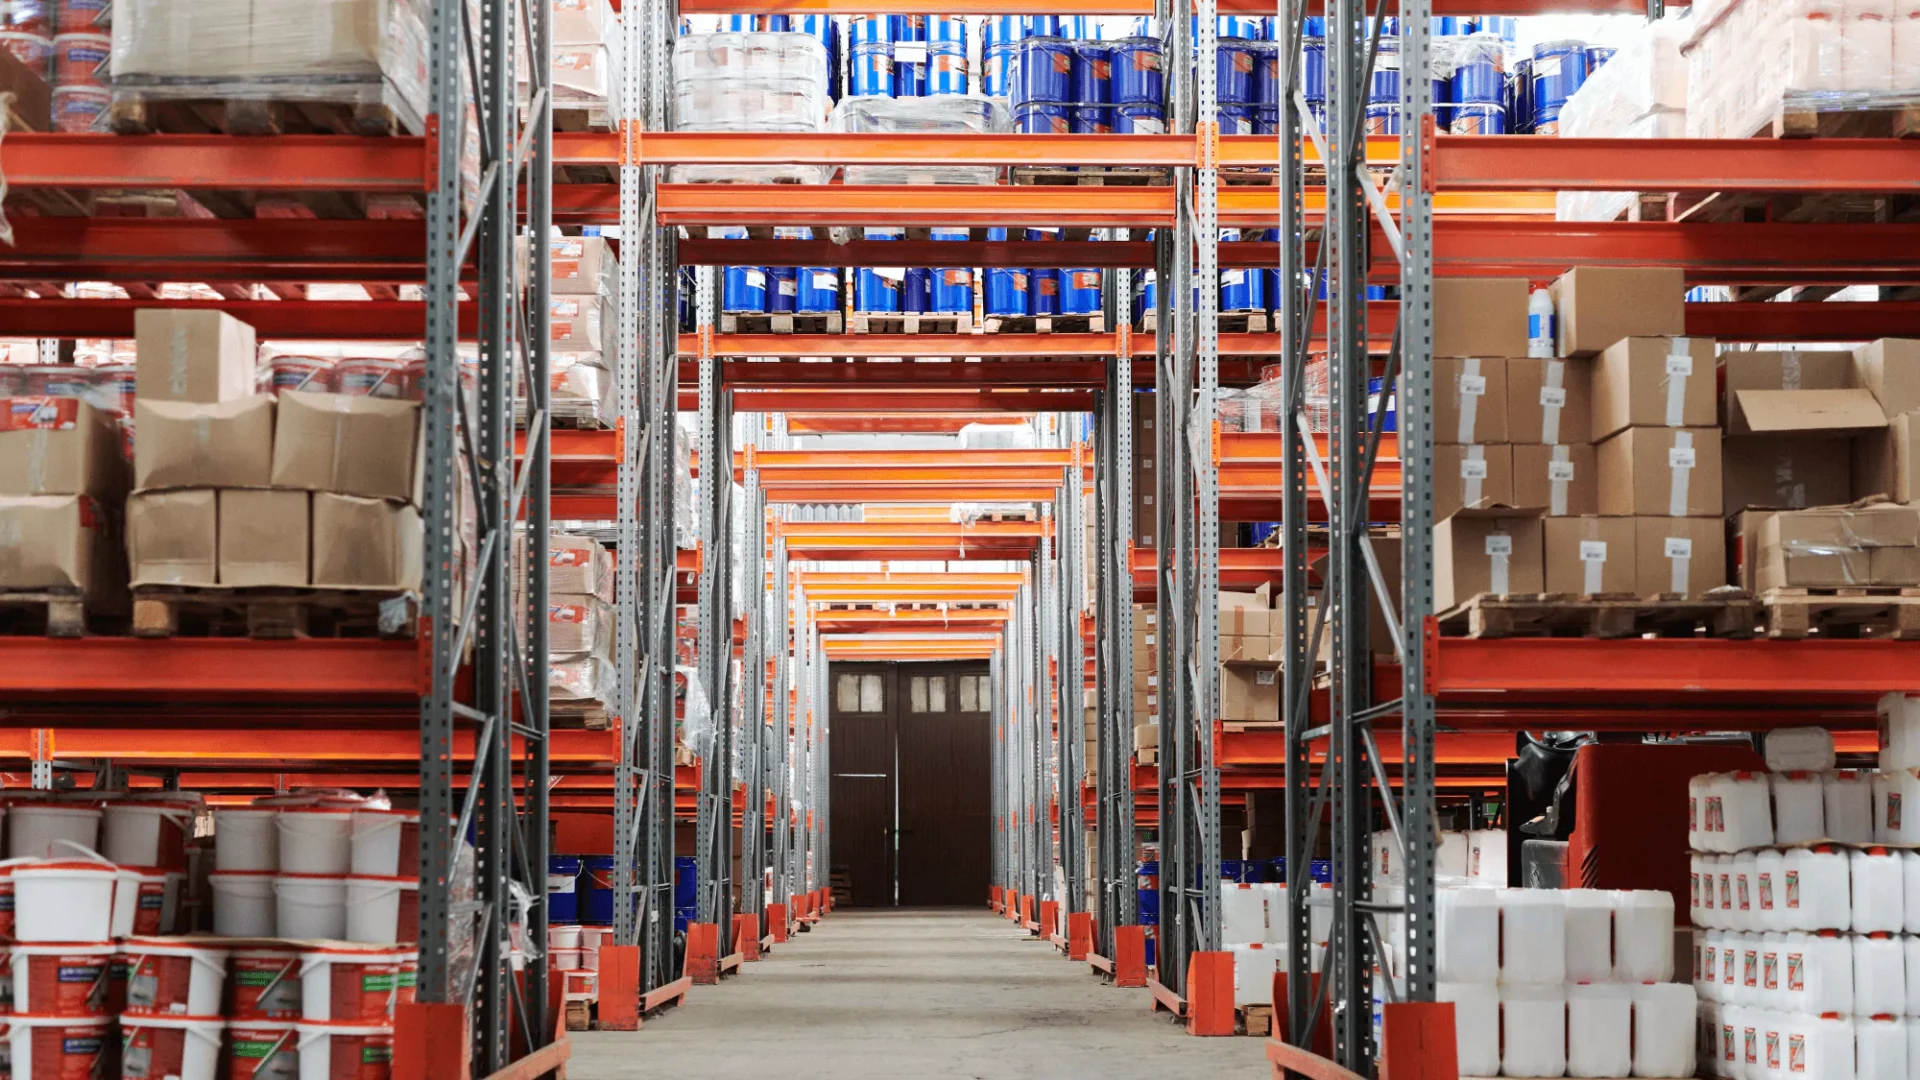 Minimize Errors with a Robust Warehouse Barcode System